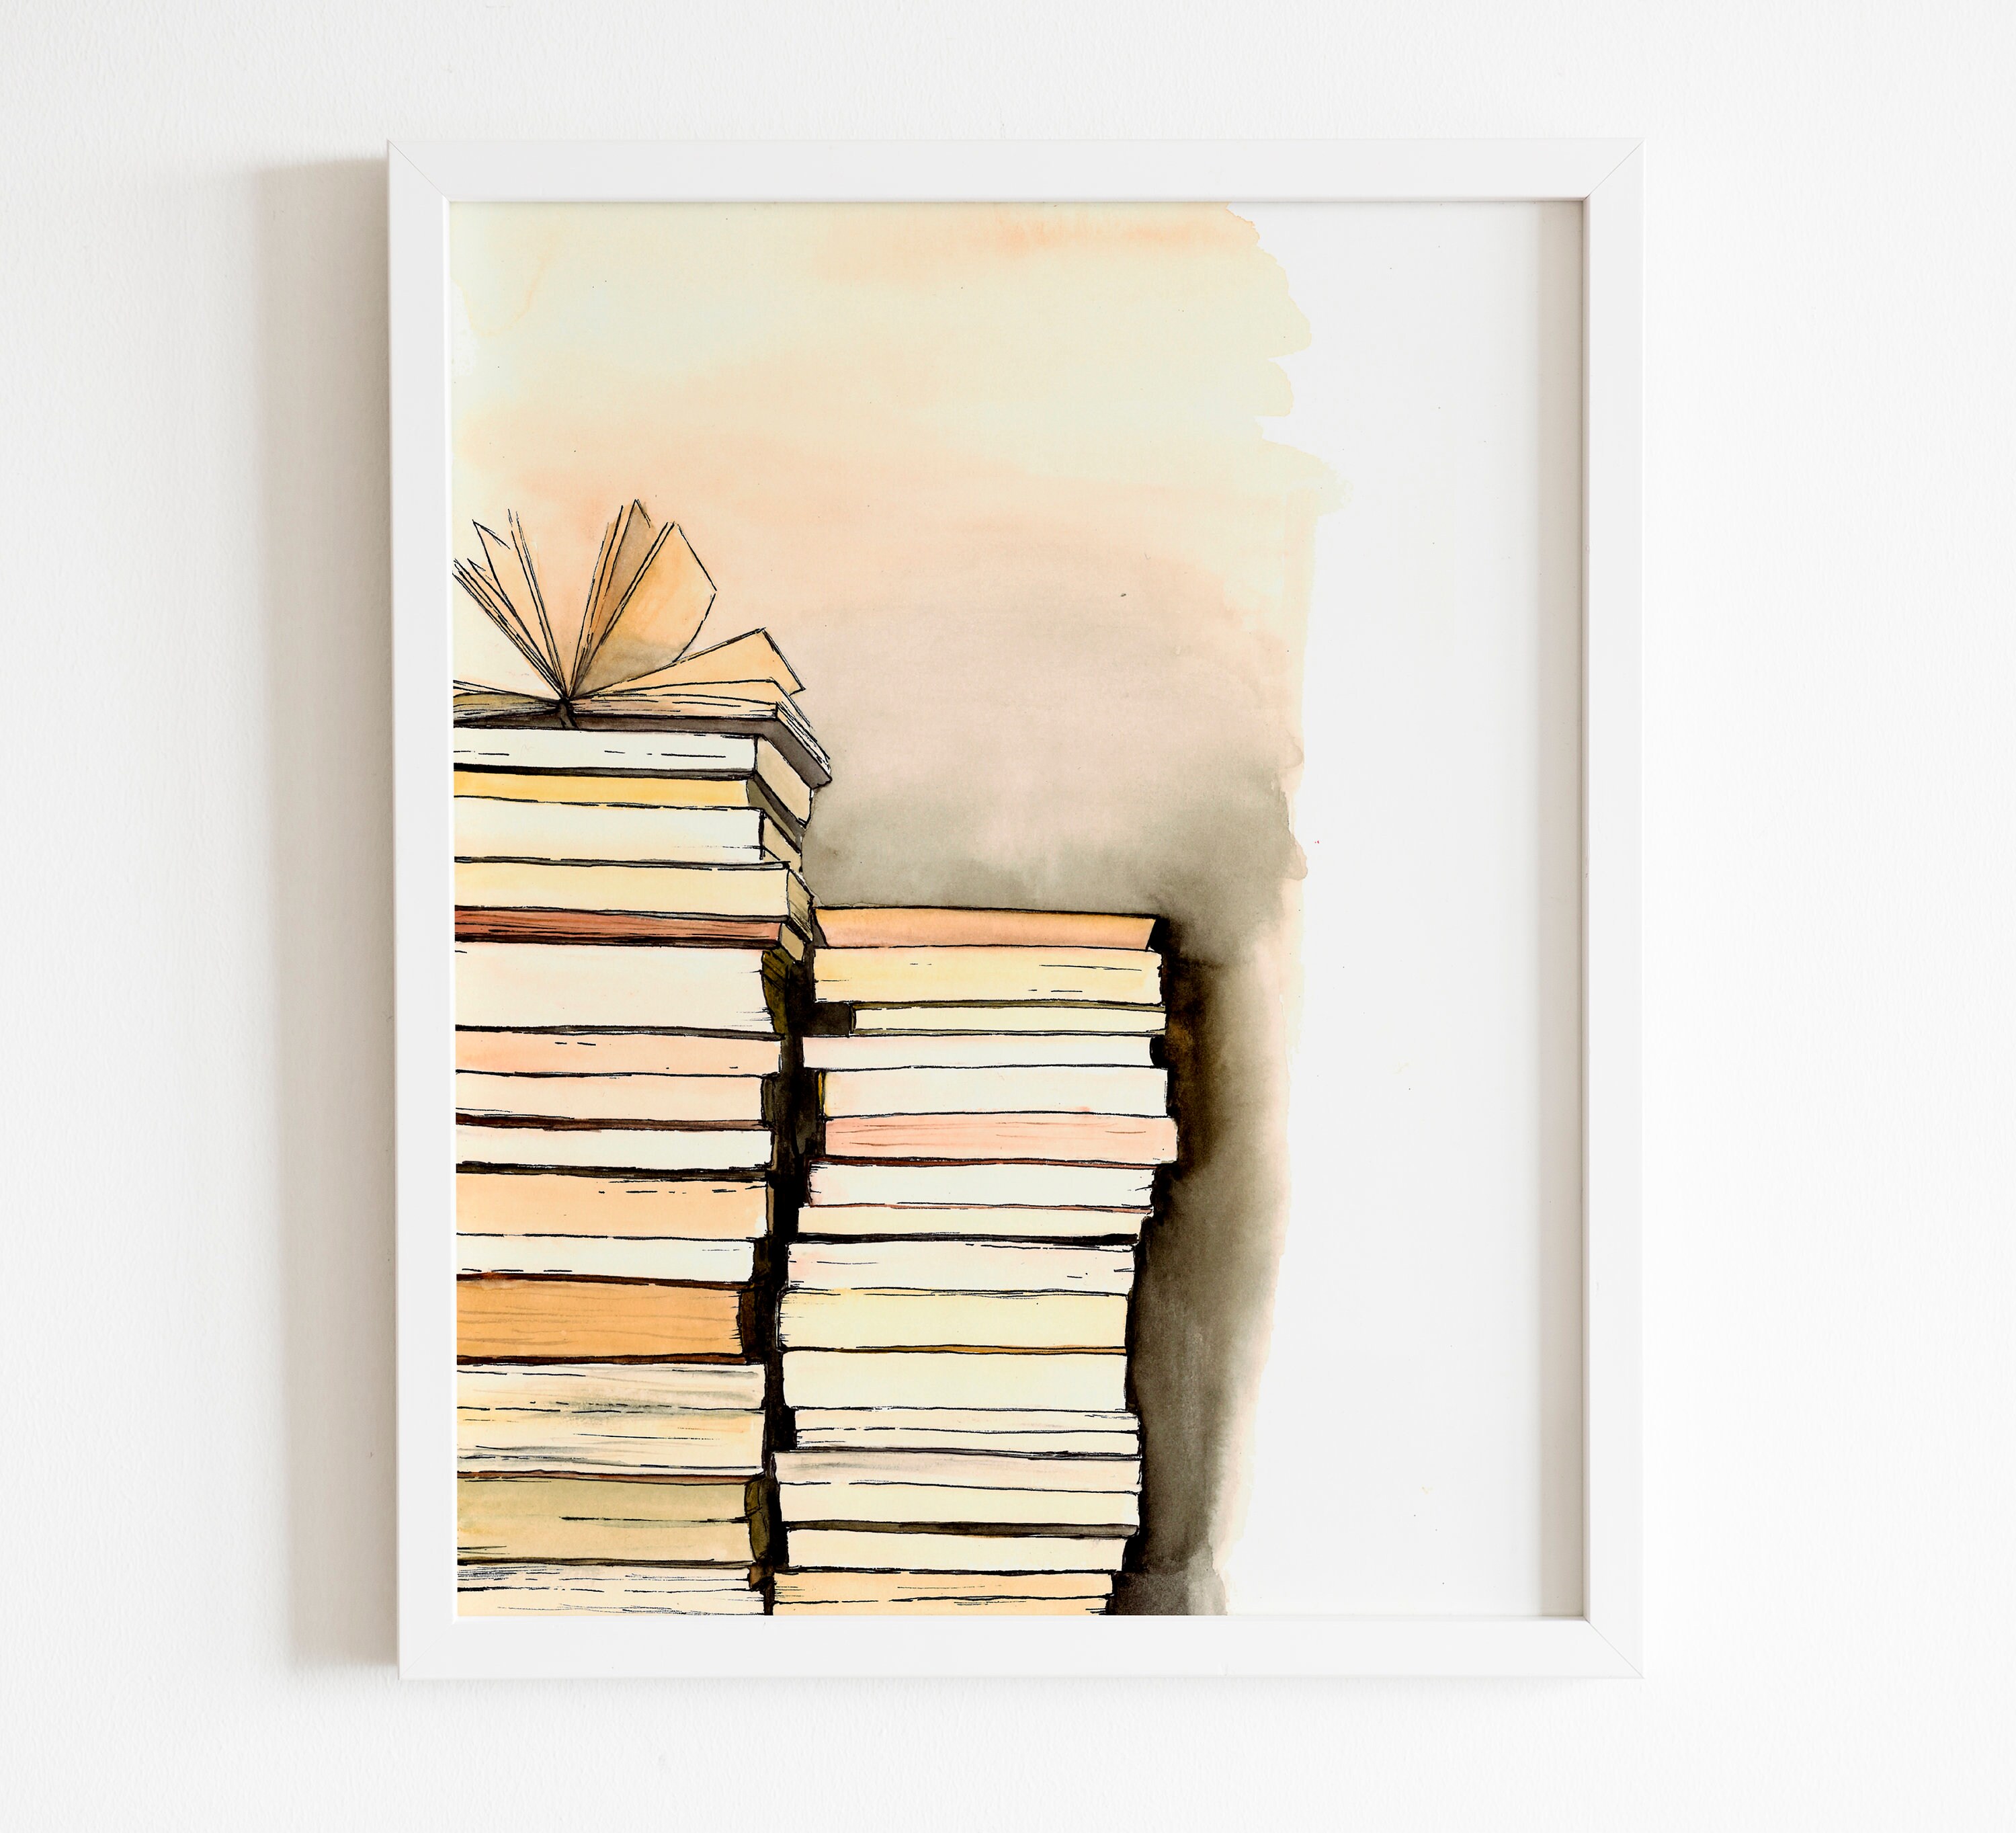 PERSONALIZED ART, Stack of Books Print, Custom Book Stack Watercolor  Painting, Book Lover Gift, Librarian Gift, Book Art Gift, Cute Wall Art 